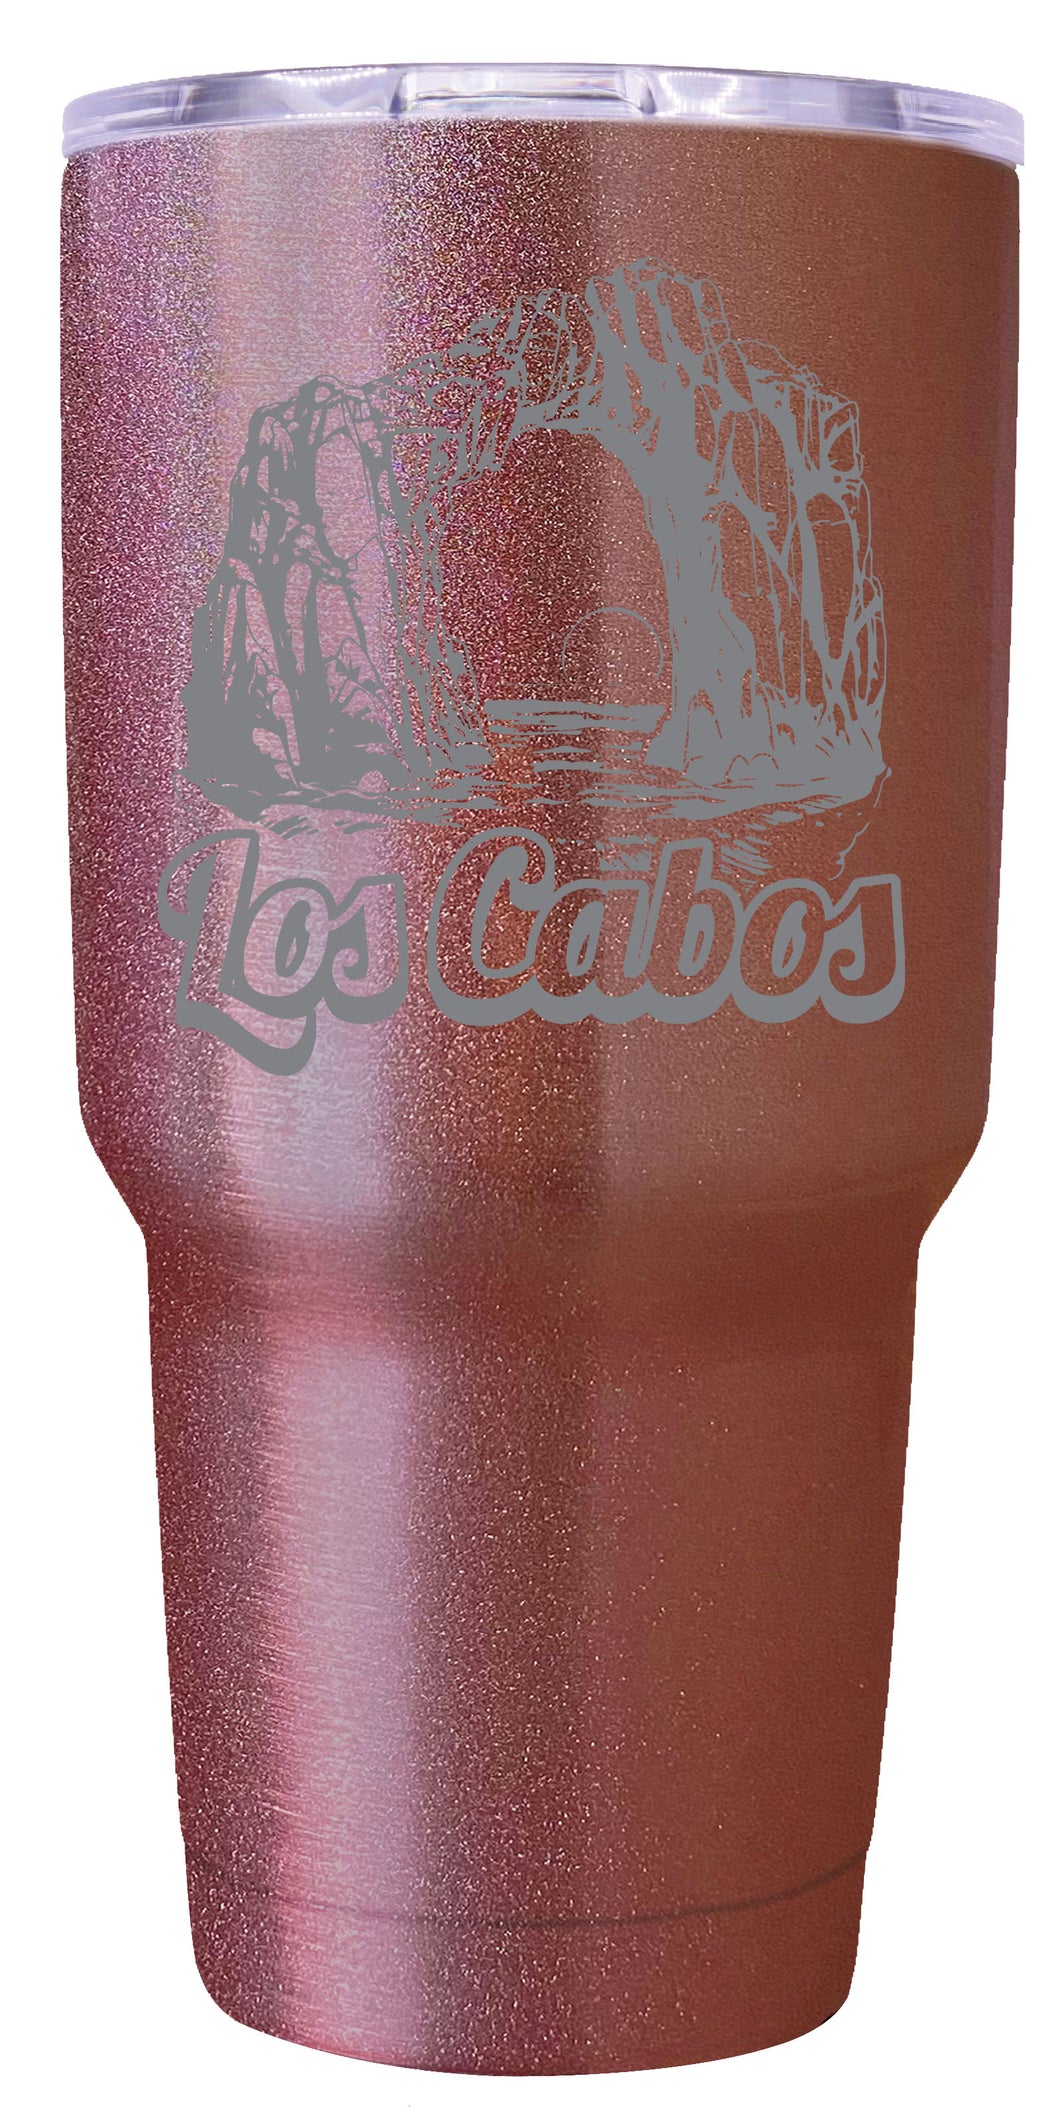 Los Cabos Mexico Souvenir 24 oz Engraved Insulated Stainless Steel Tumbler